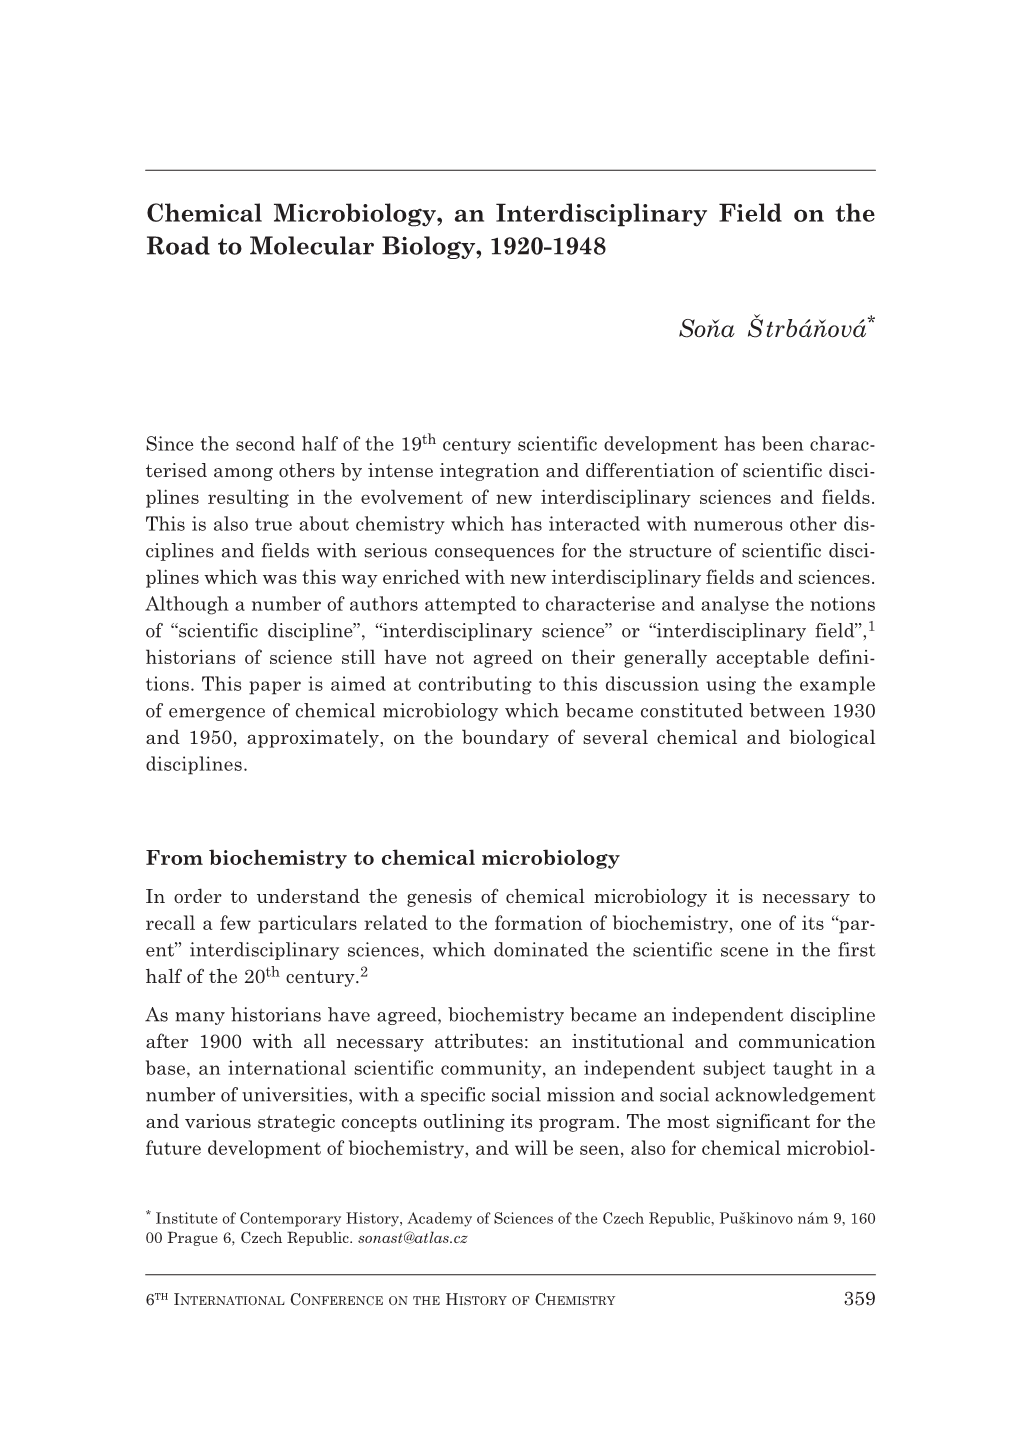 Chemical Microbiology, an Interdisciplinary Field on the Road to Molecular Biology, 1920-1948